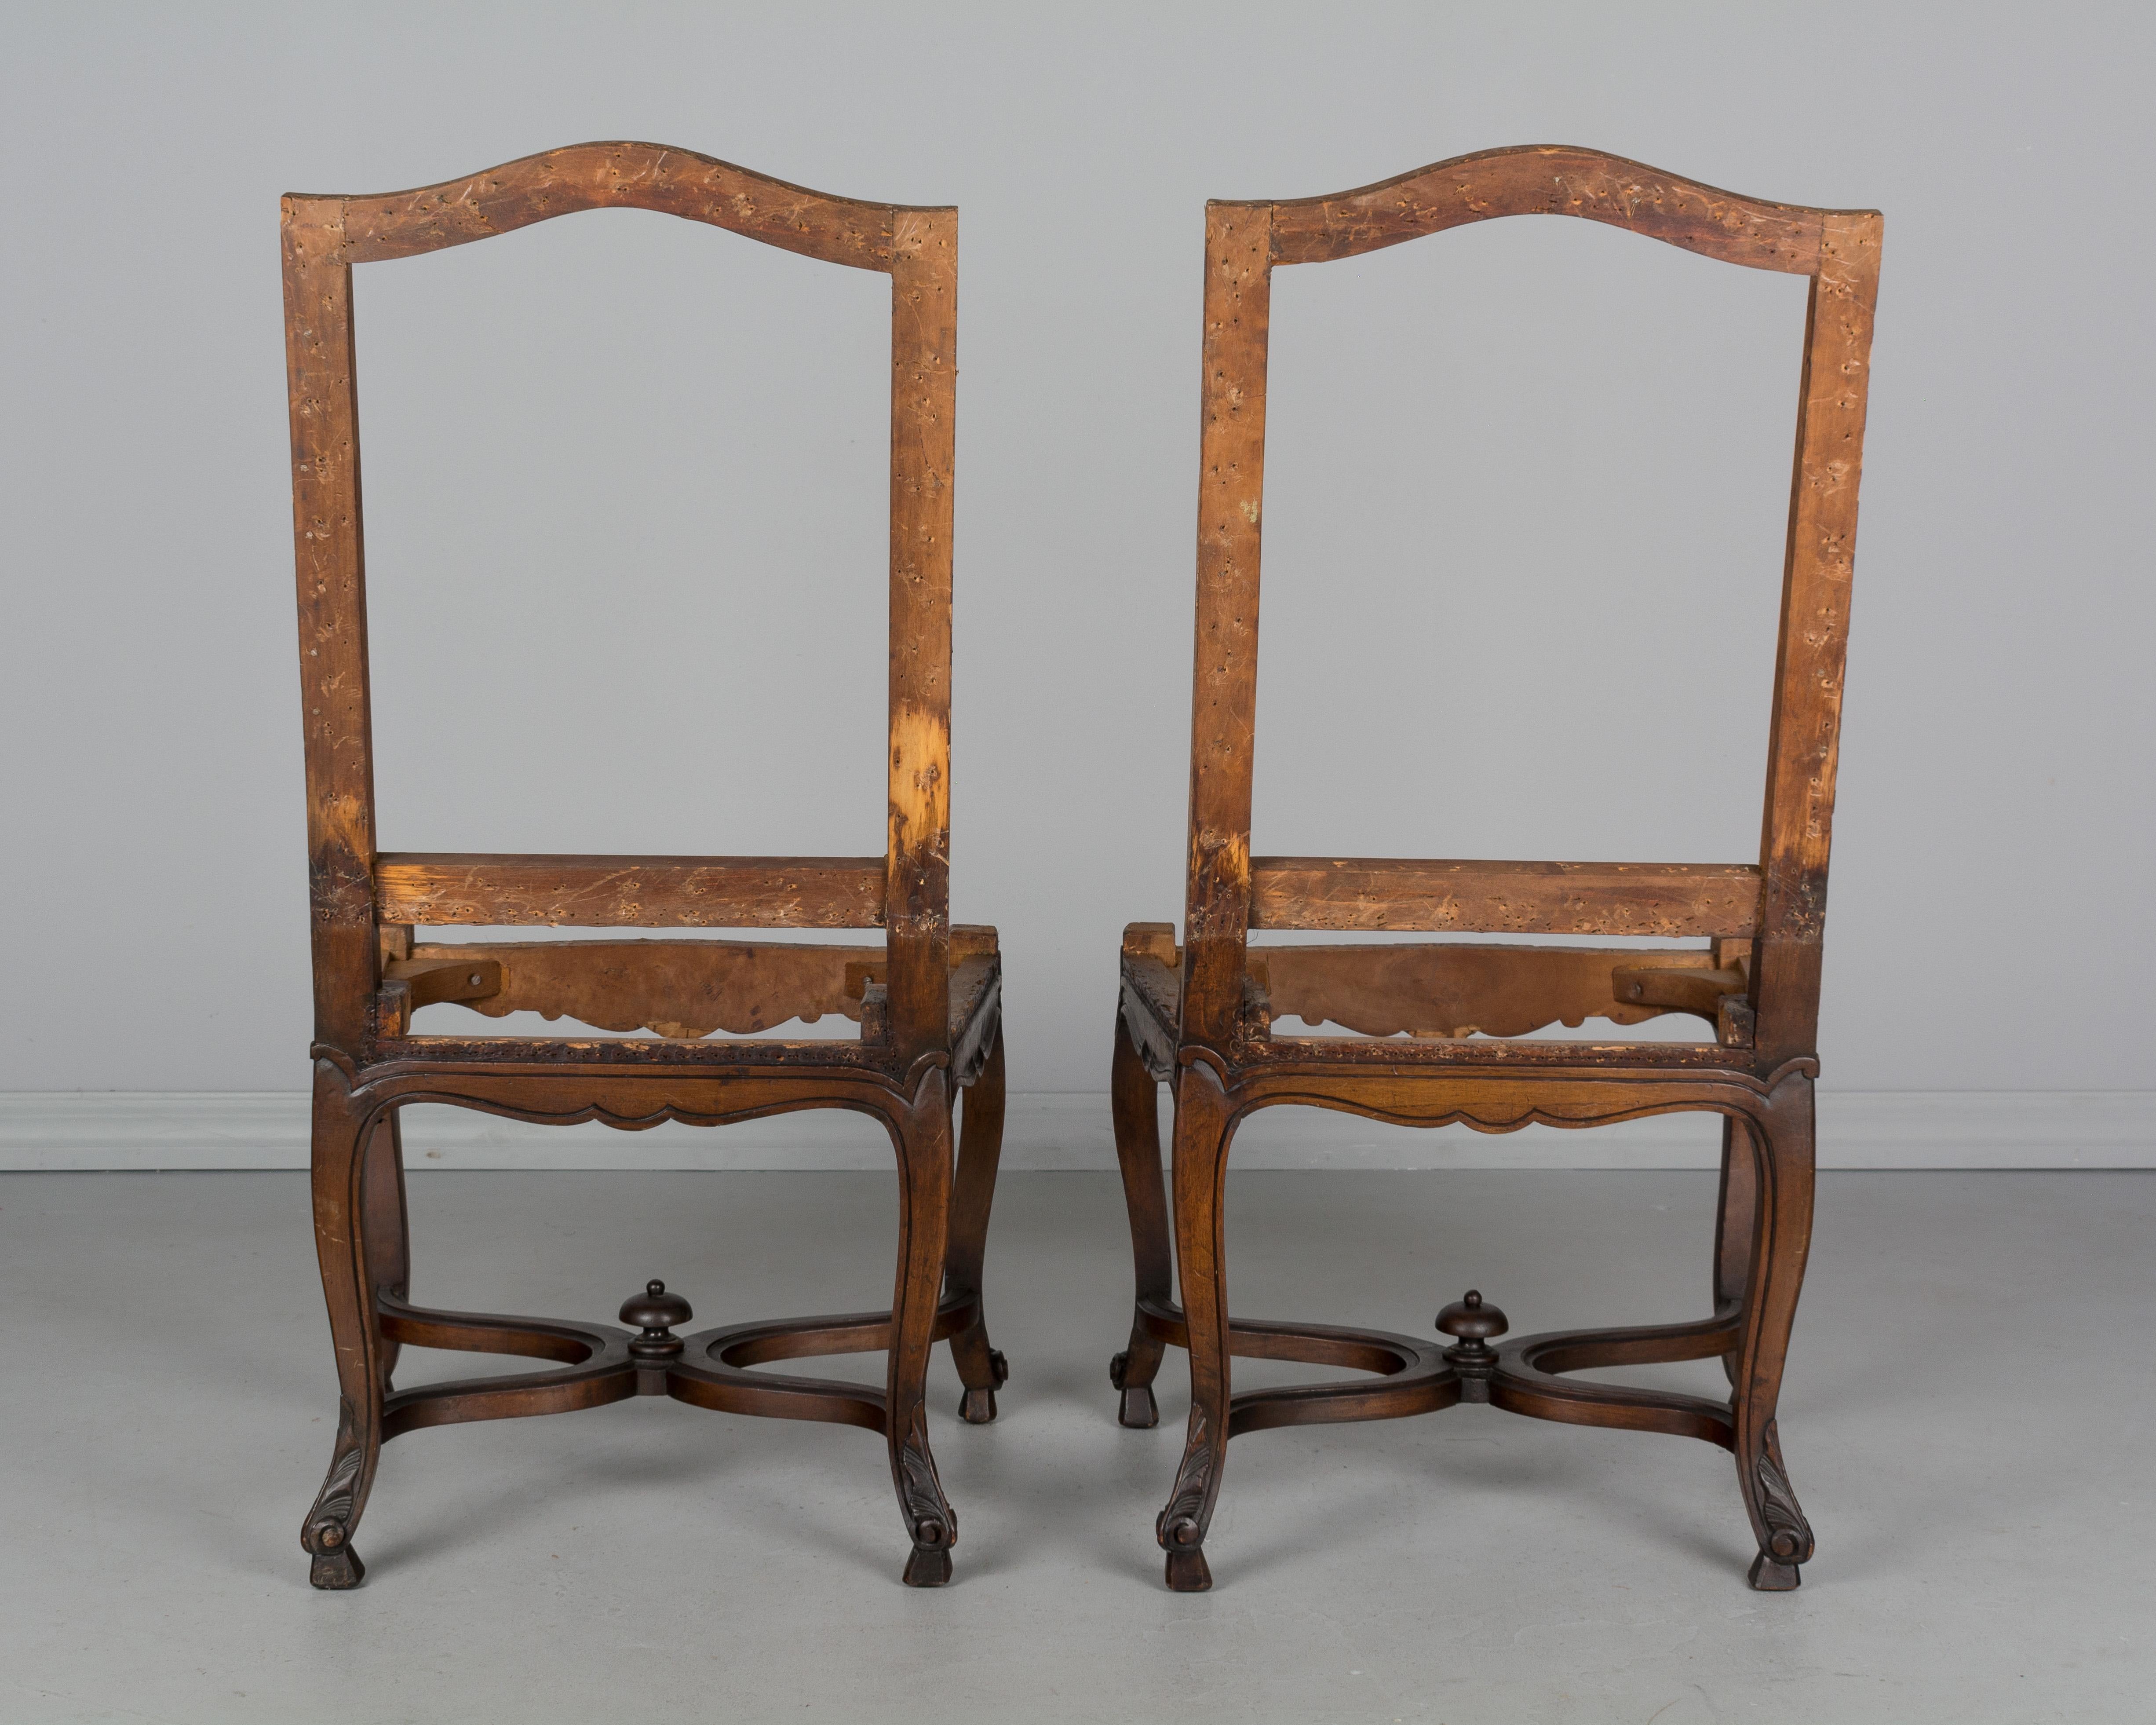 Pair of French Louis XV Style Side Chairs (Französisch)